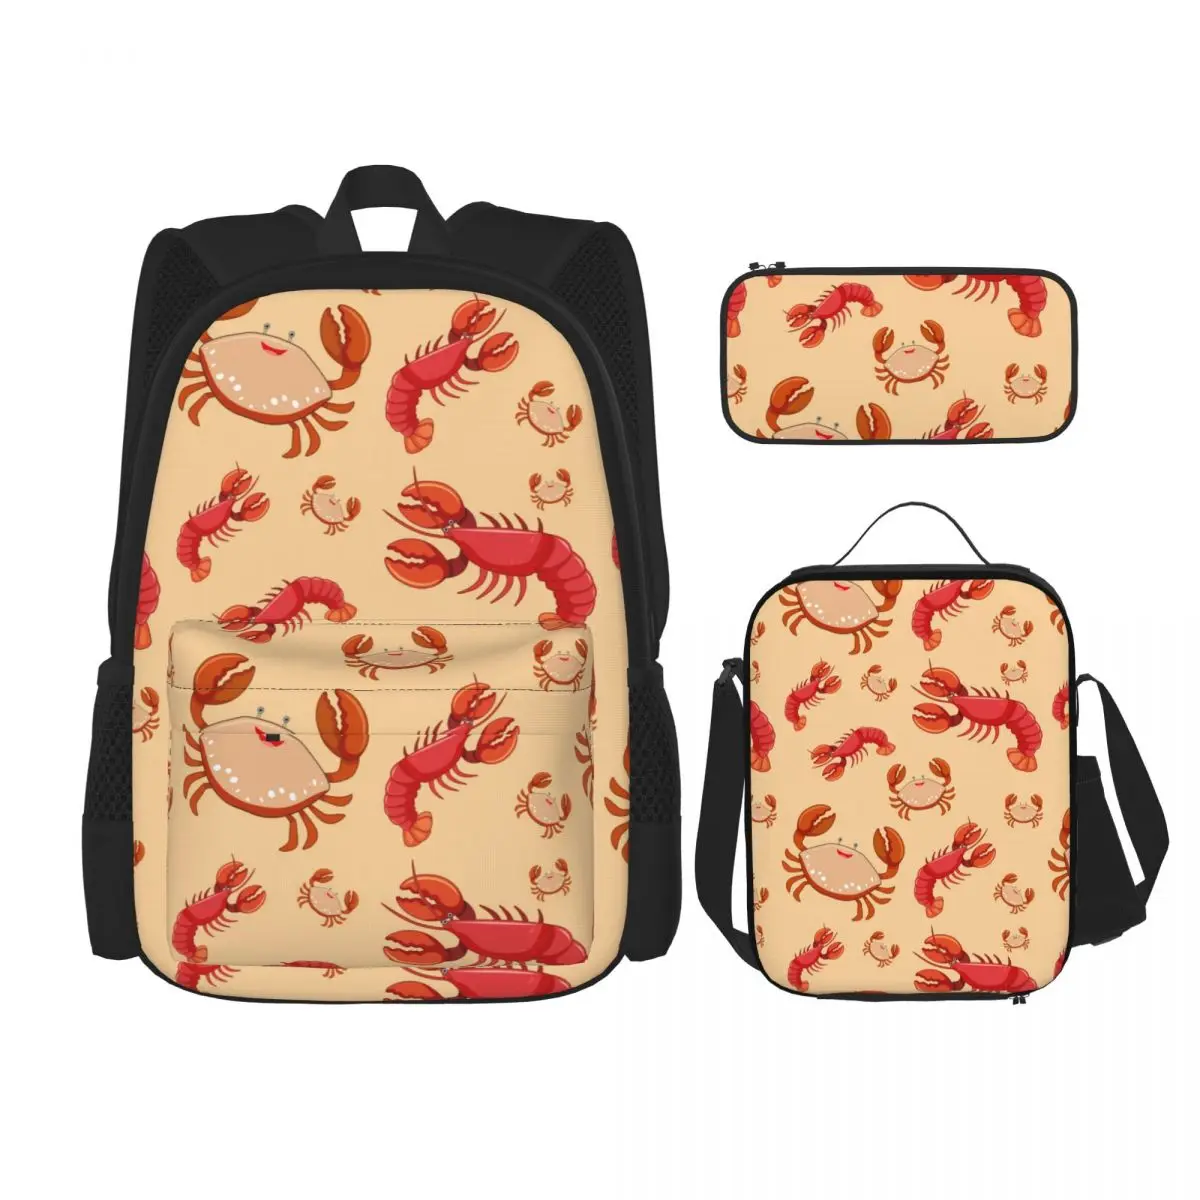 

3 Pcs Cute Lobster And Crabs Backpack Unique Prints Knapsack for Teenagers Girls Boys Travel Bagpack Children School Bags